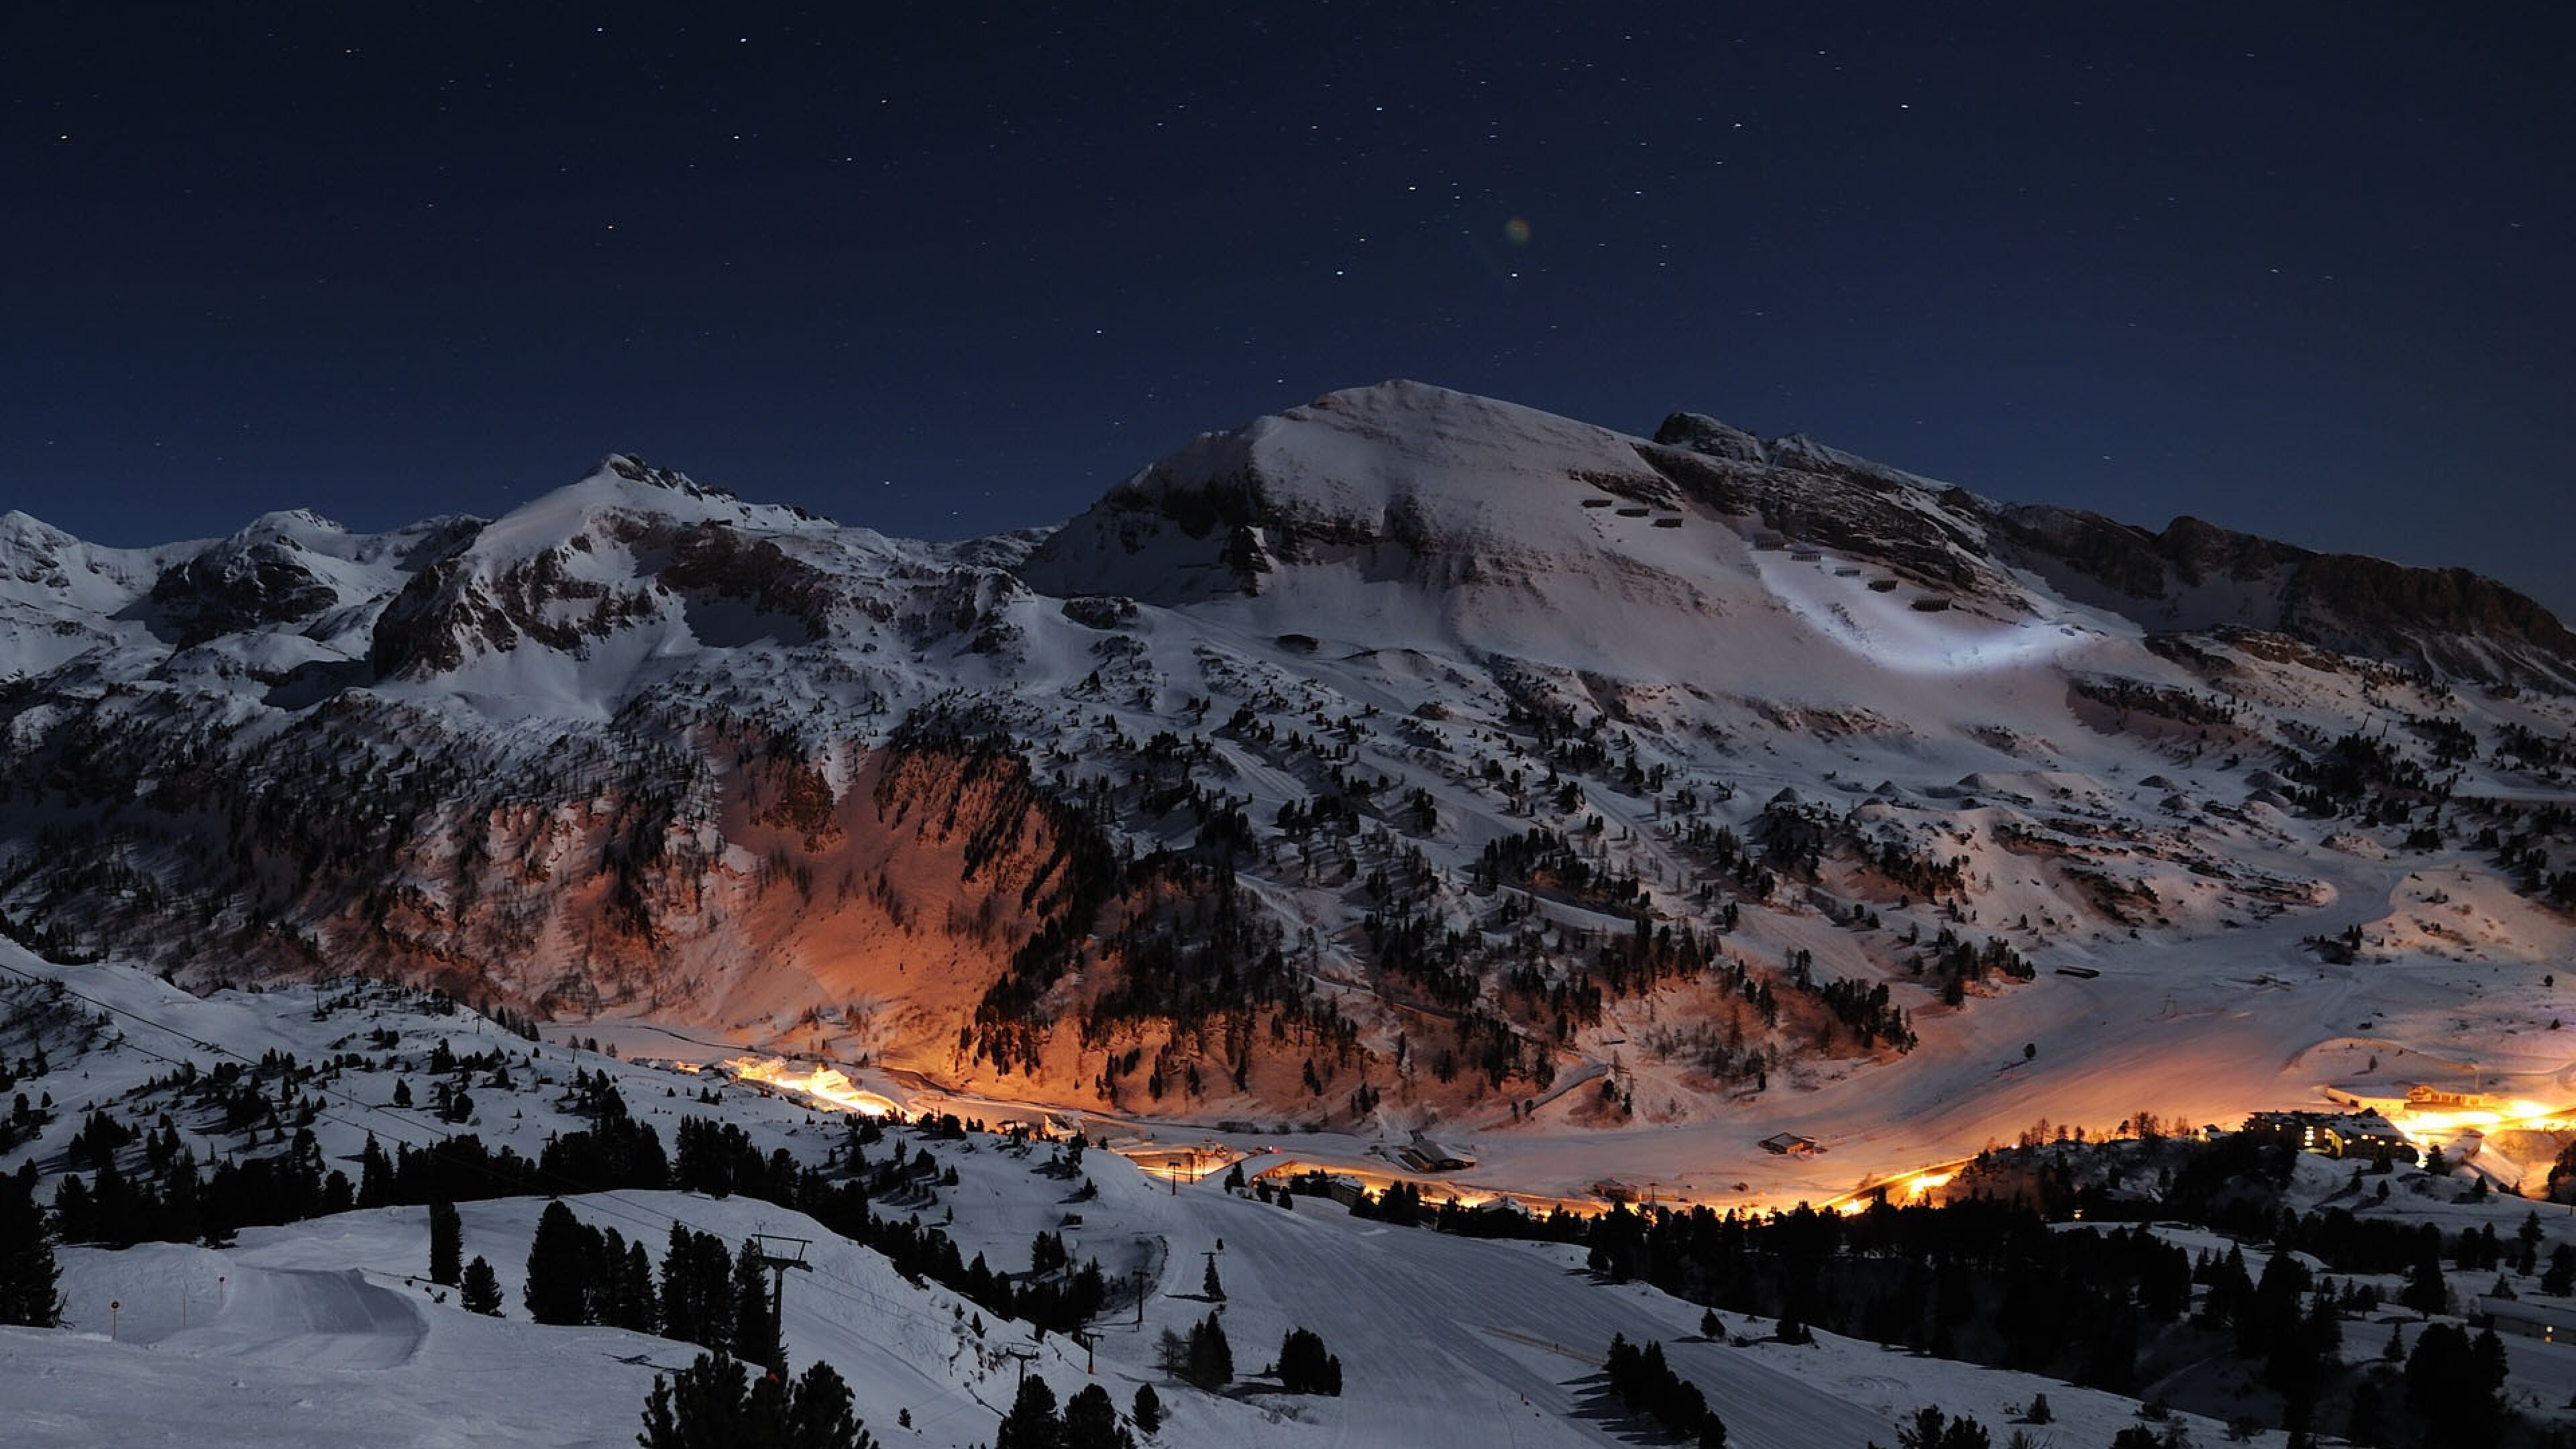 3840x2160 Night Star Alps 4k HD 4k Wallpapers, Images ...